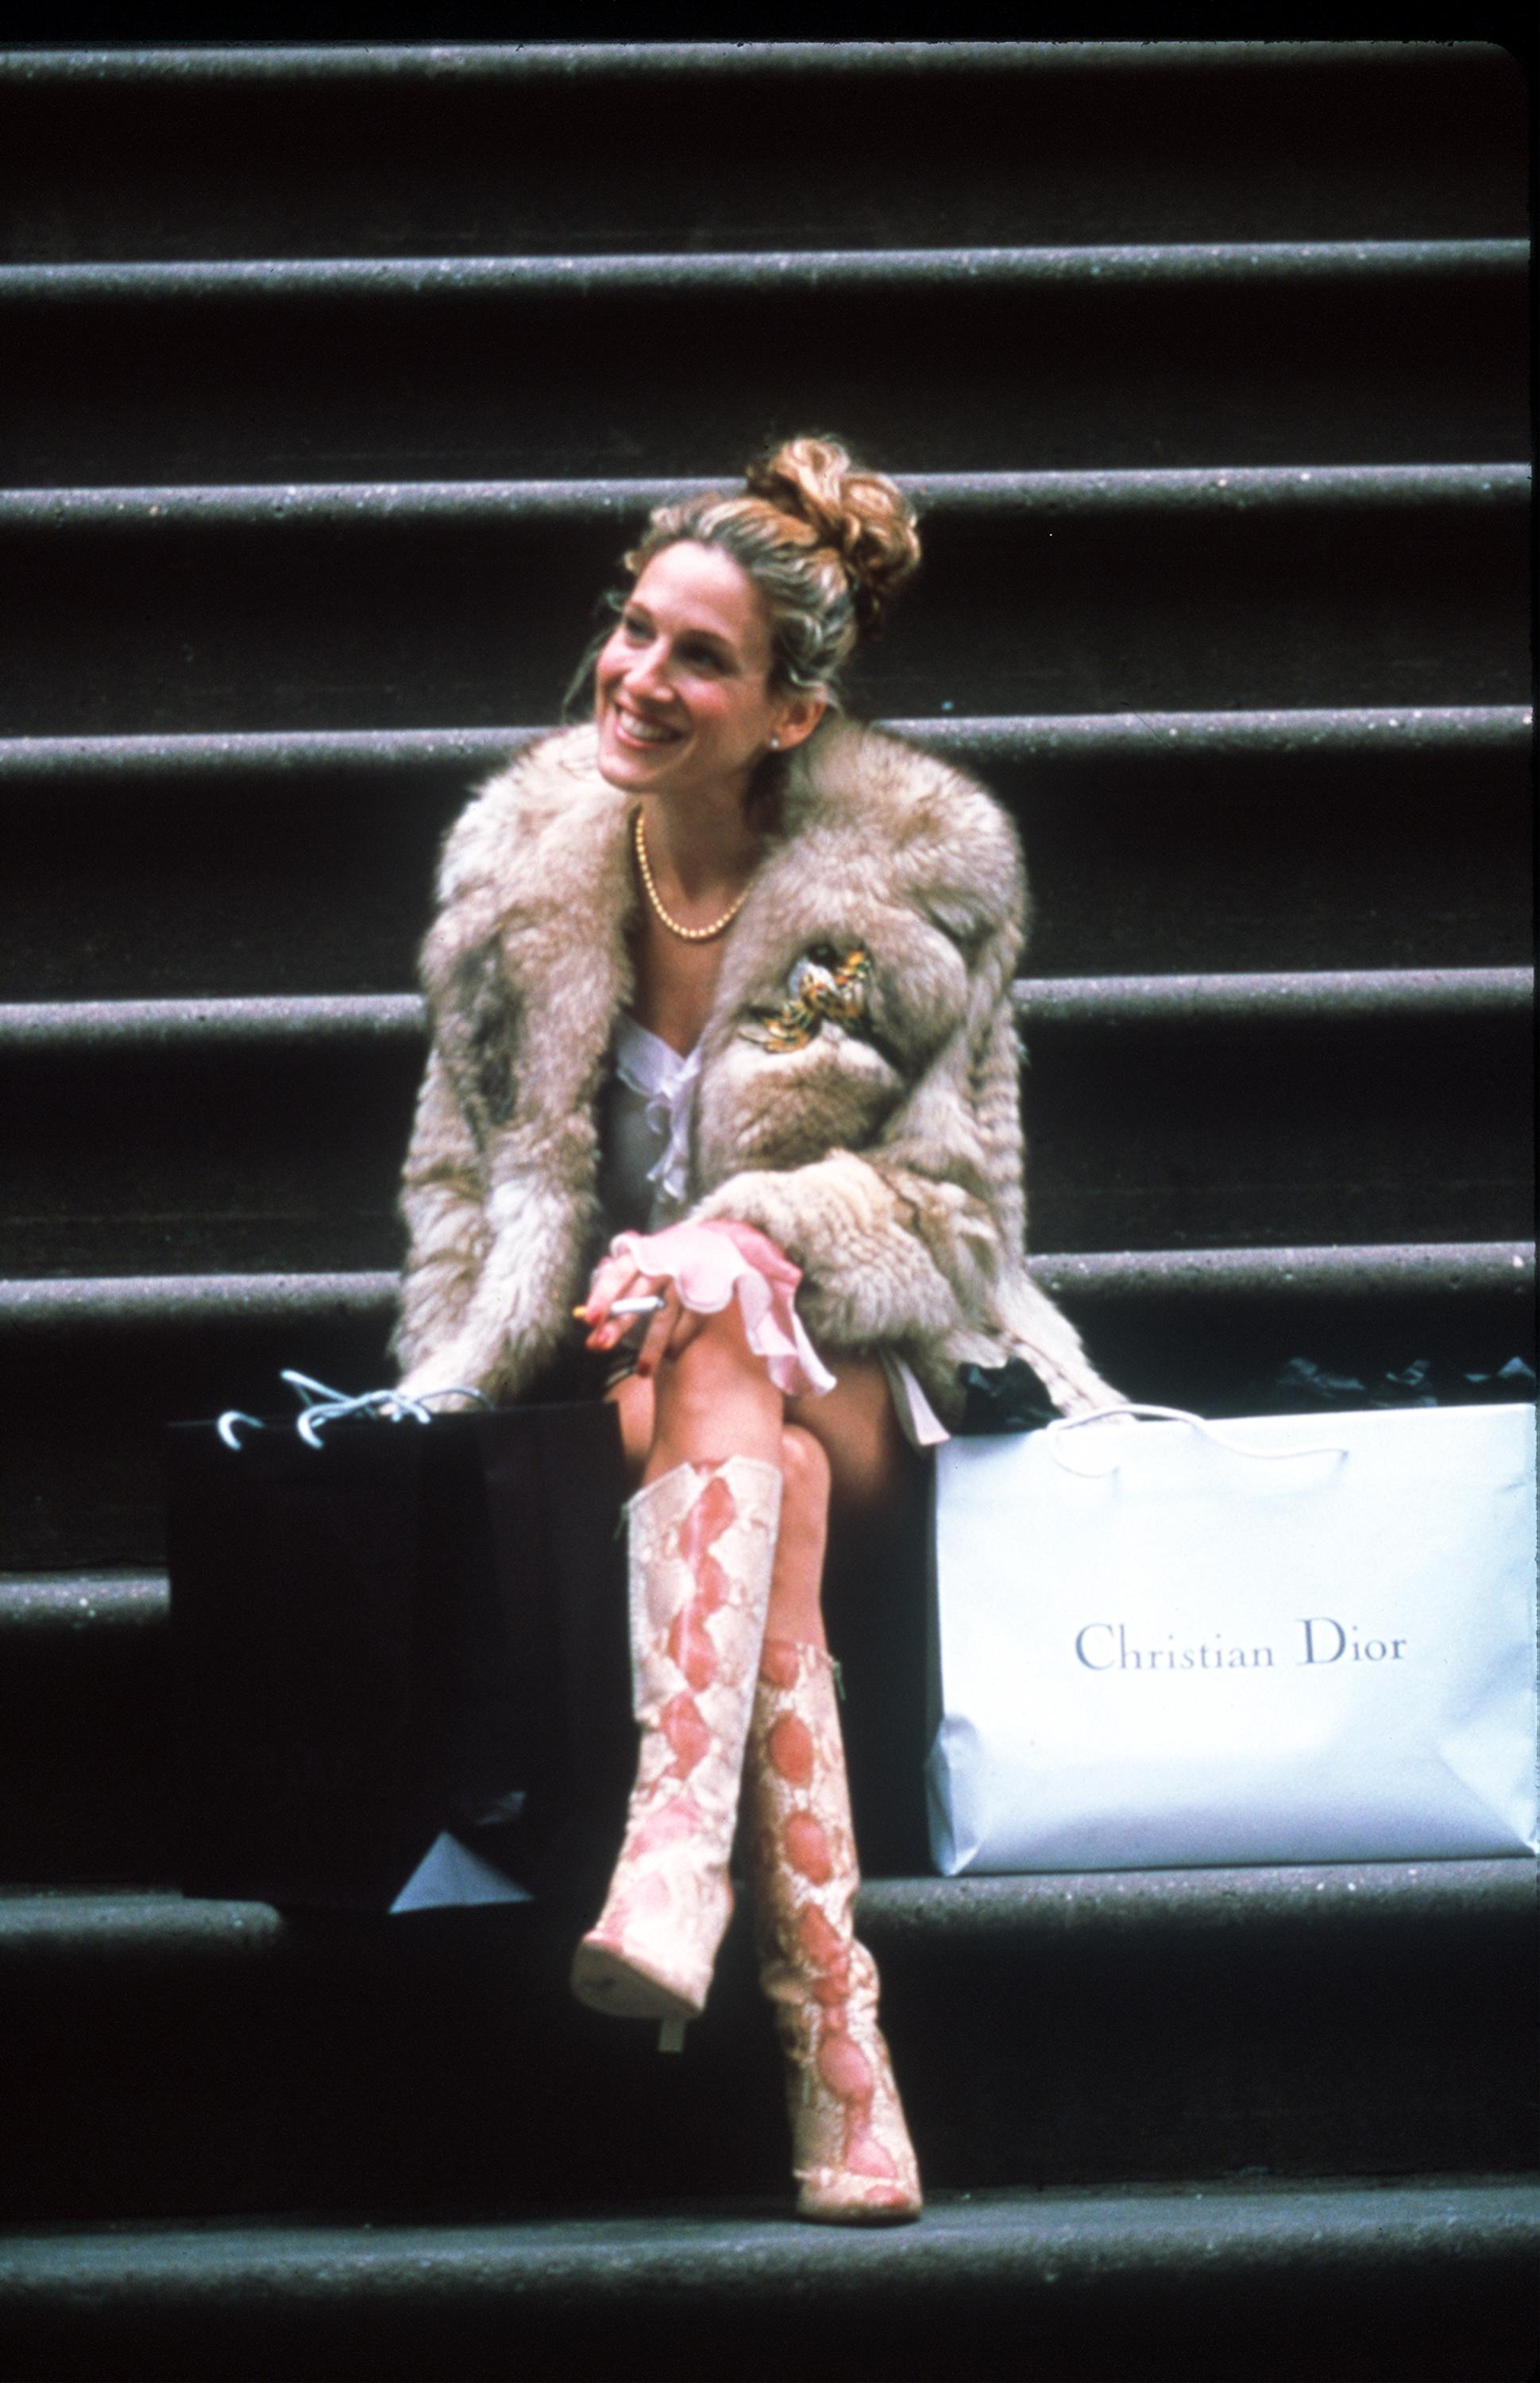 Sarah Jessica Parker as Carrie Bradshaw in 'Sex and the City'